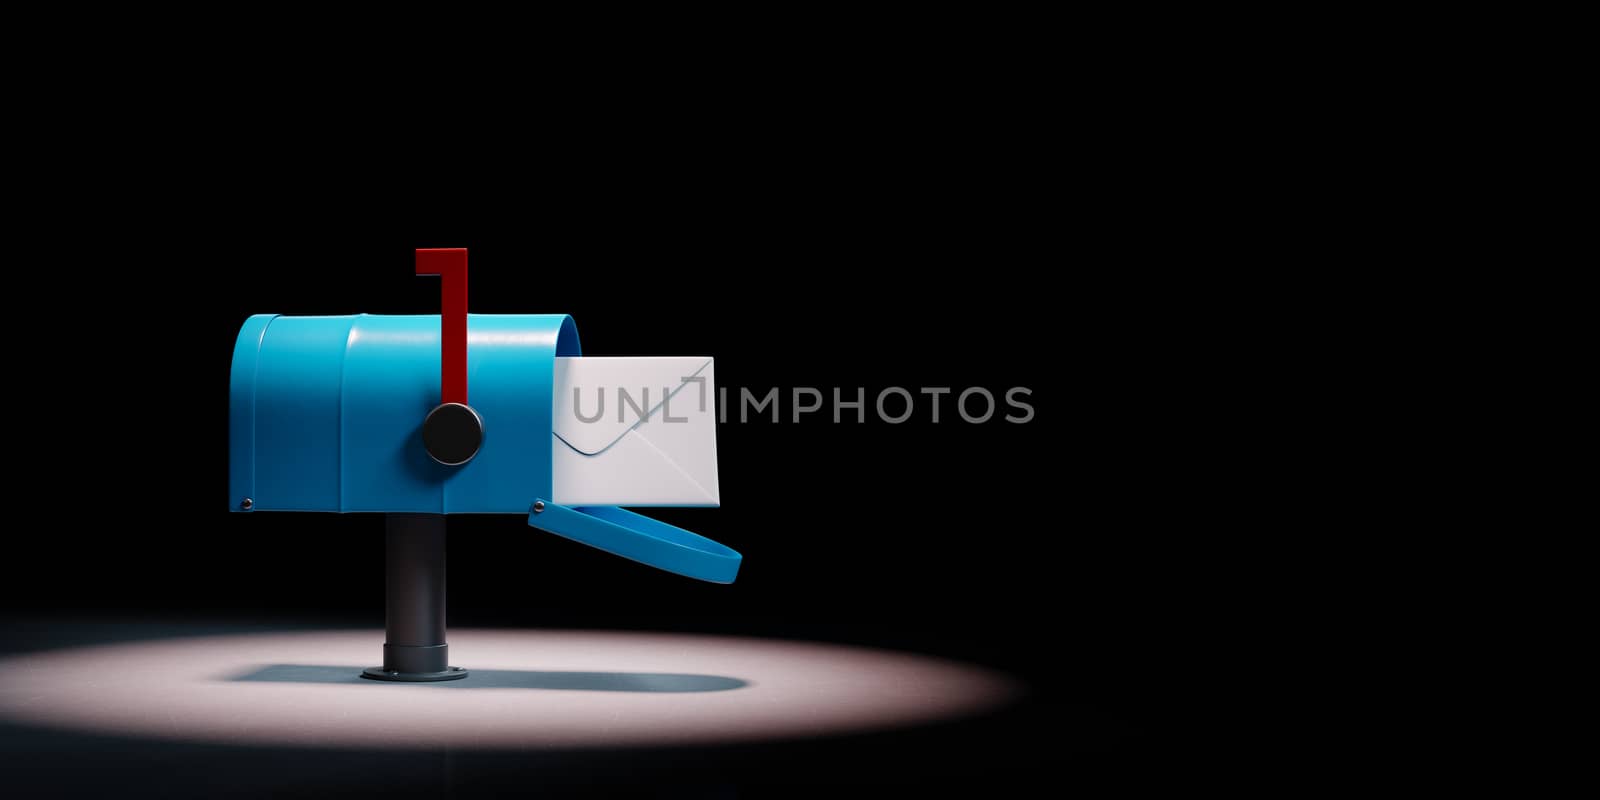 Mailbox Spotlighted on Black Background by make